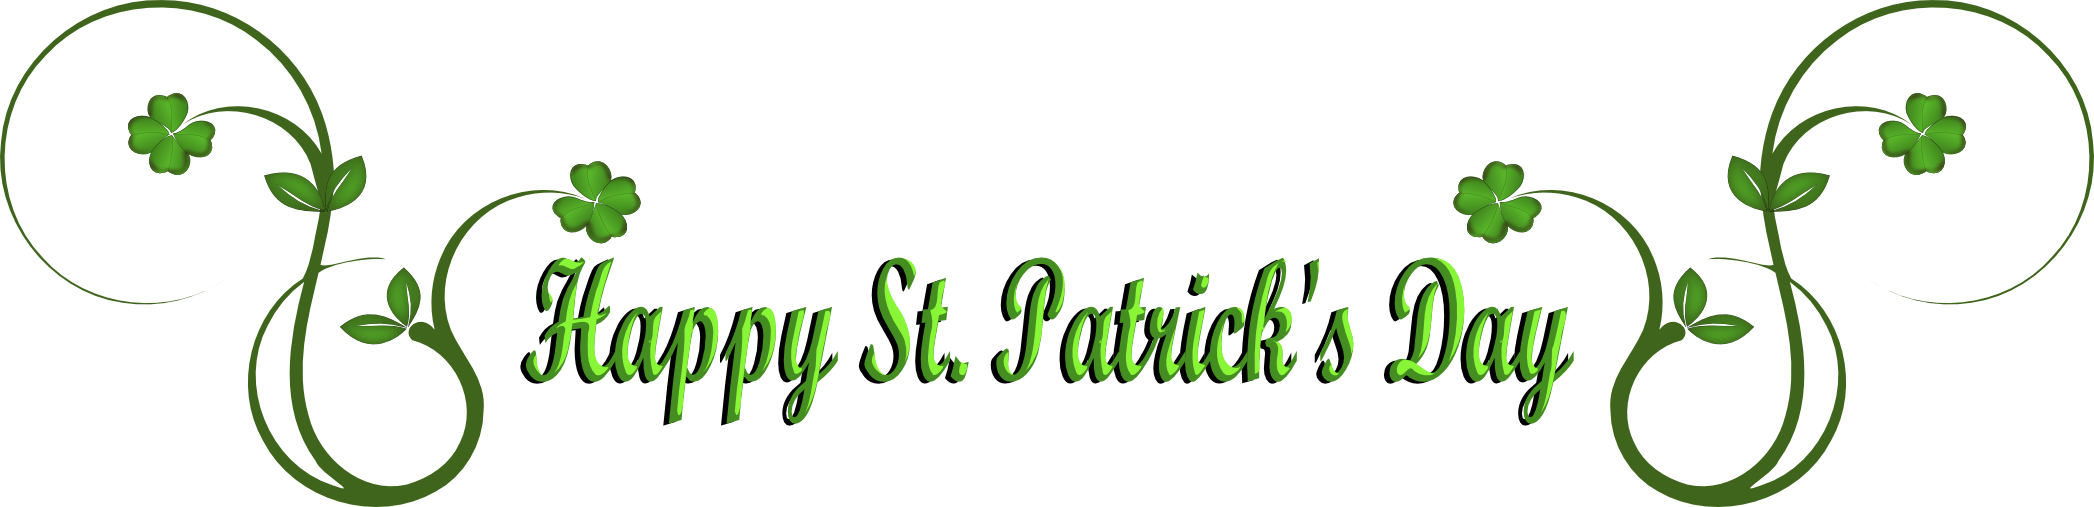 Heritage With St  Patrick S Day Clipart   Eye Draw It Eye Draw It